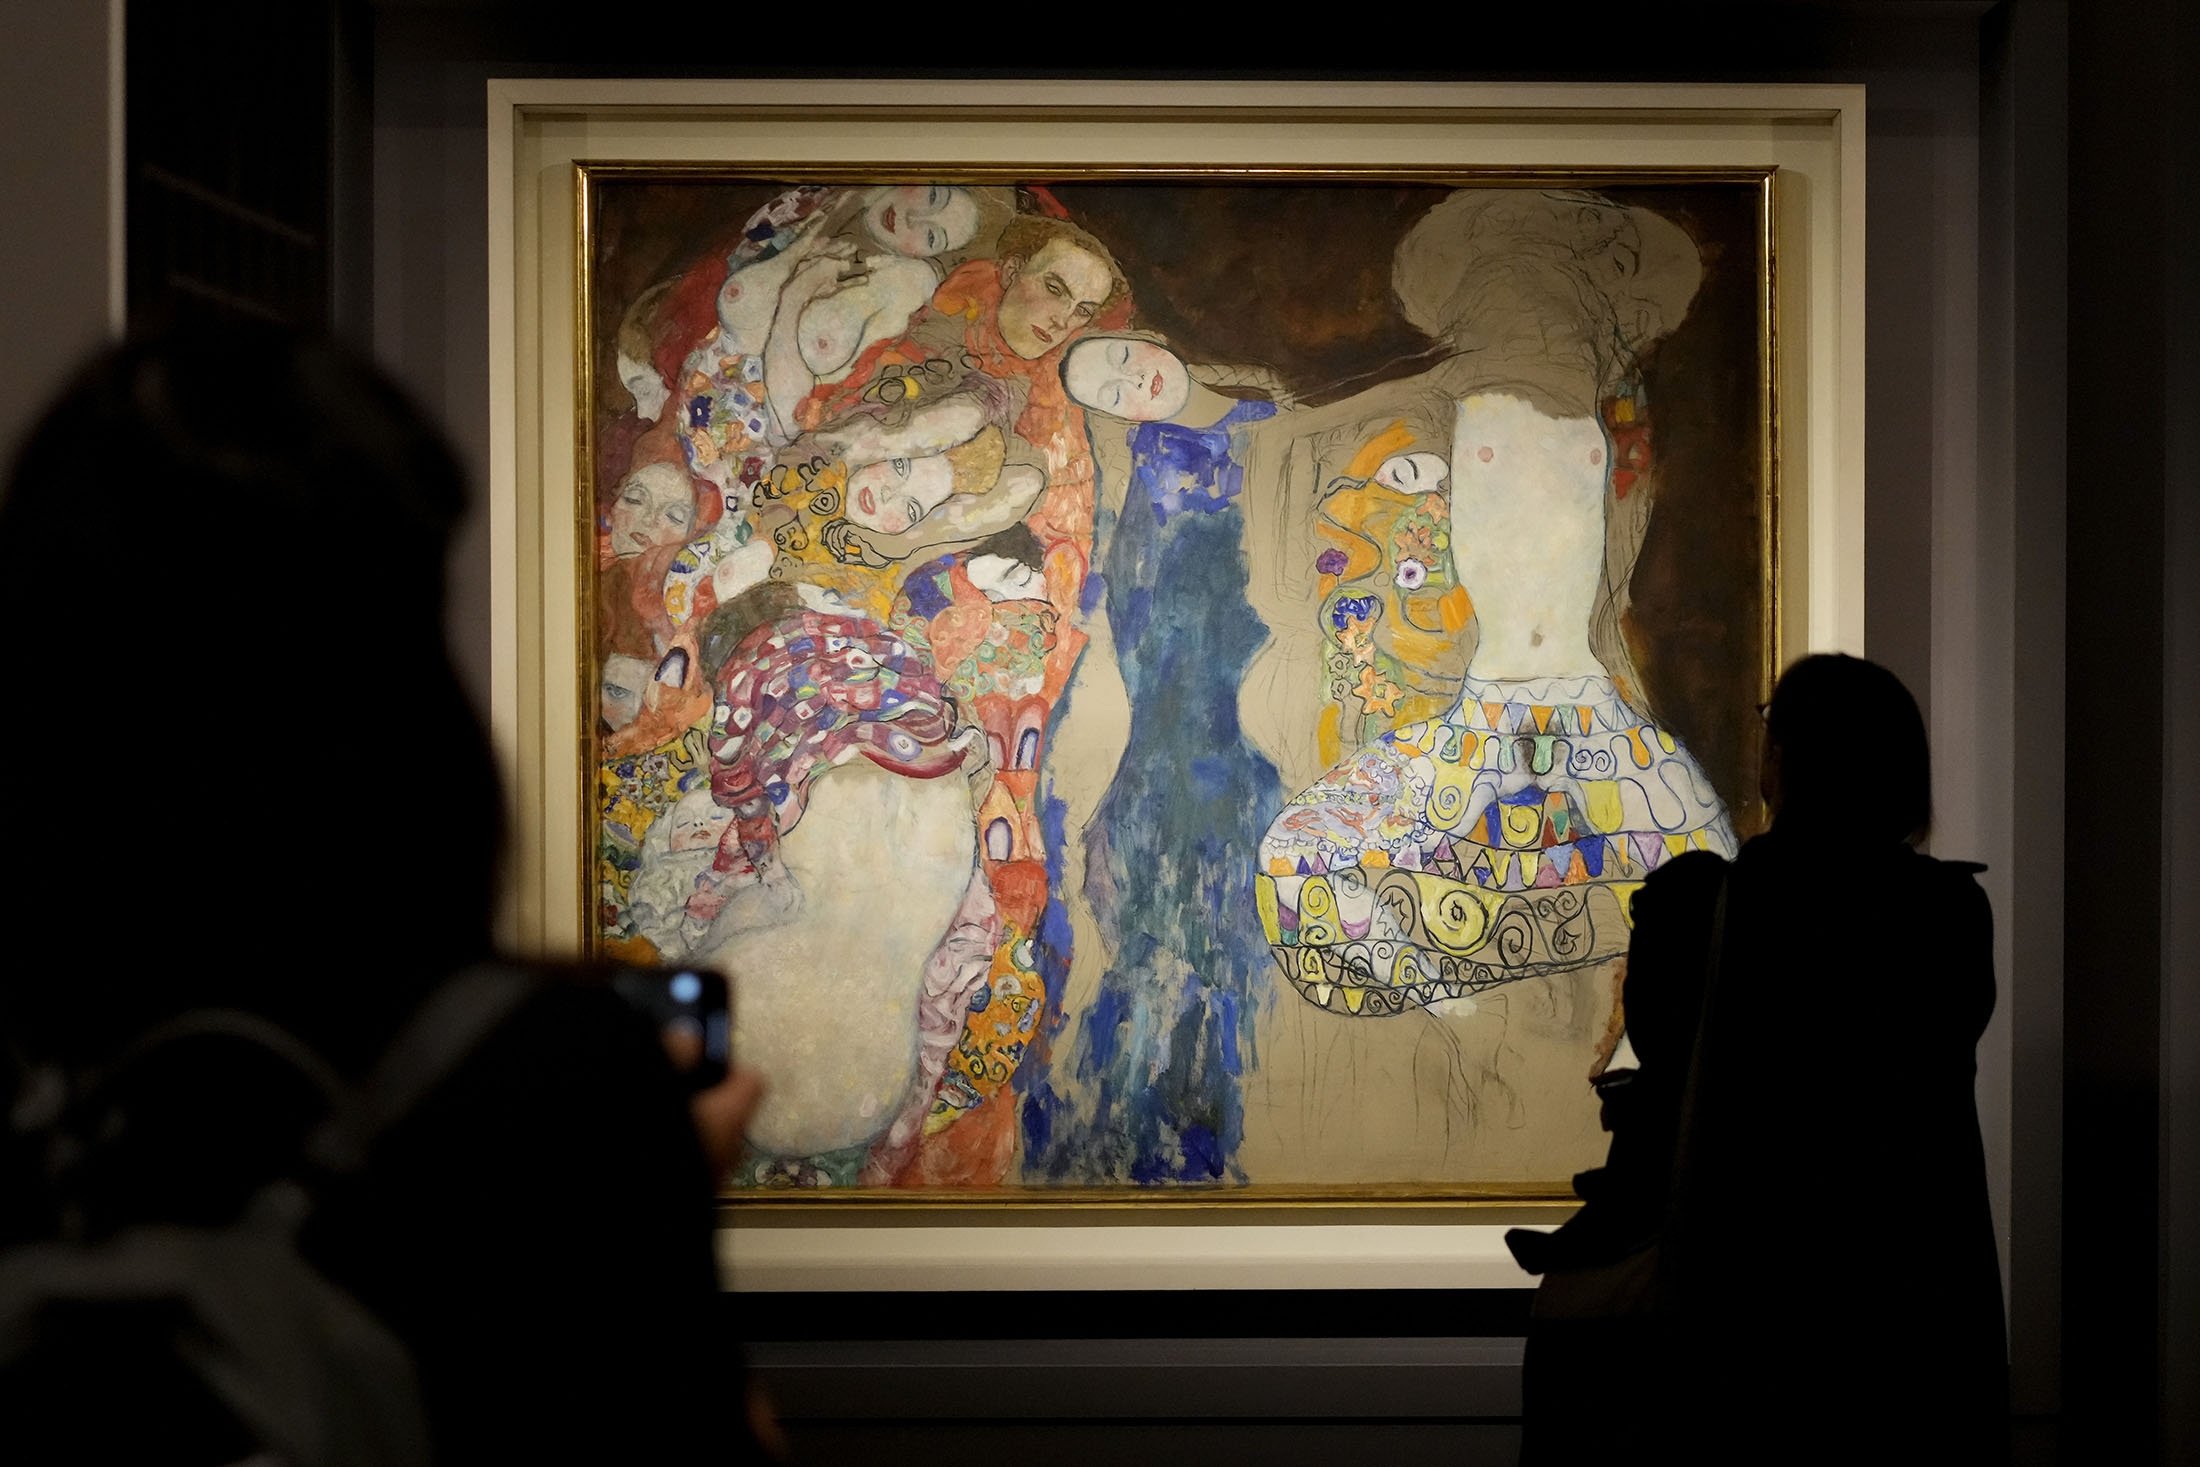 People admire Gustav Klimt's oil on canvas painting 'The Bride' (1918) on display at the exhibition 'Klimt. The Secession and Italy' at the Museum of Rome, in Palazzo Braschi, Rome, Italy, Oct. 26, 2021. (AP Photo)